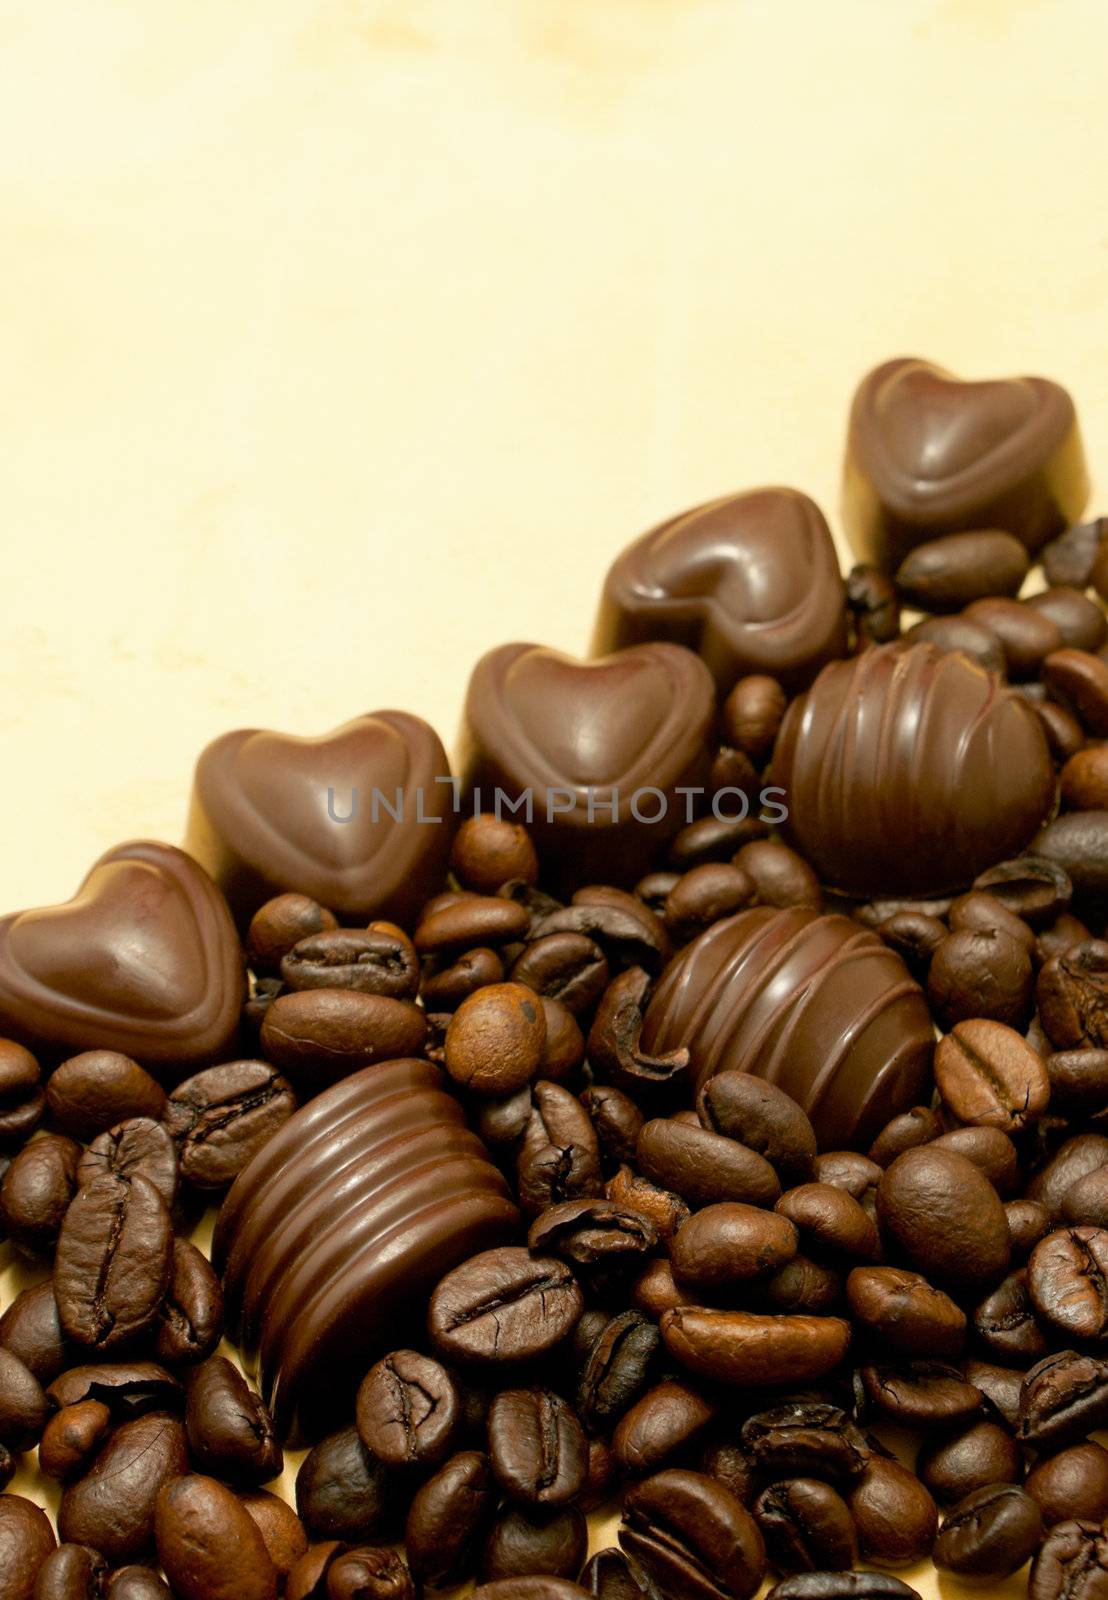 Heart shaped chocolate candies and coffee beans on grungy paper